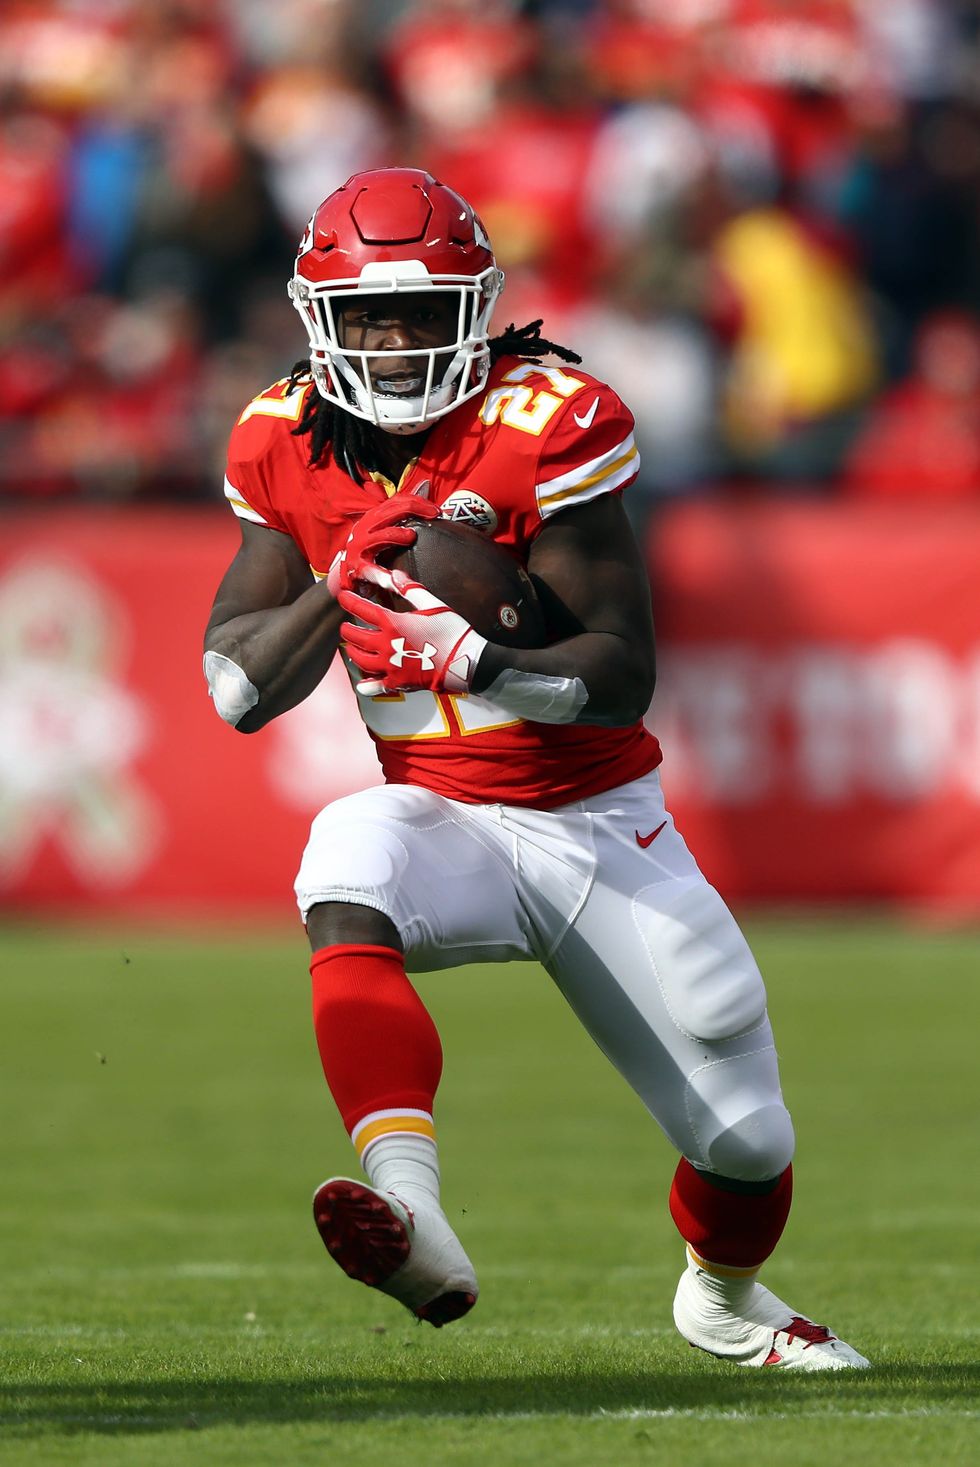 A different take on the Kareem Hunt situation